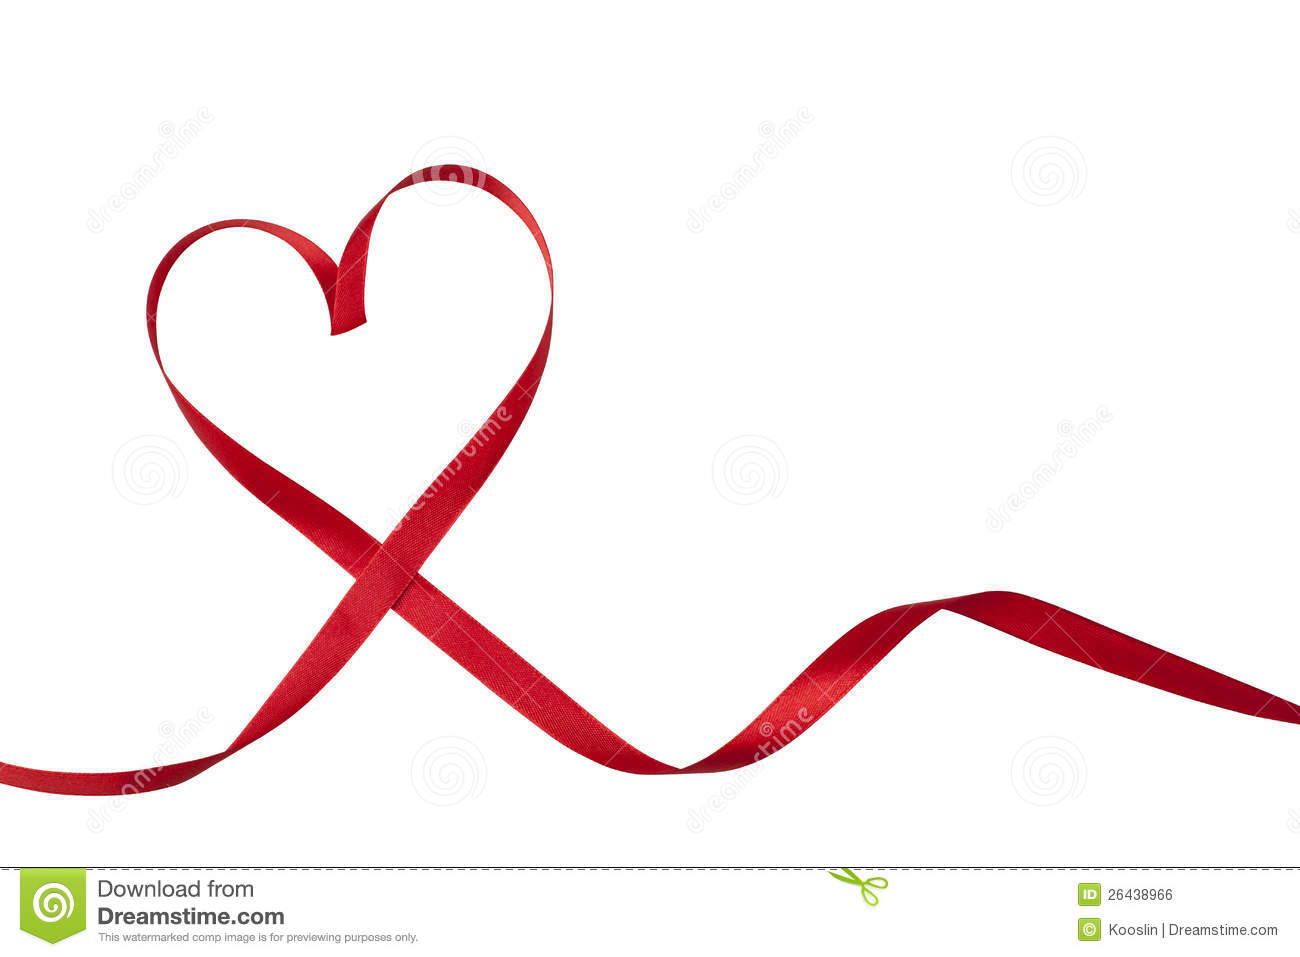 The Heart Shaped Red Ribbon Isolated On A White Background